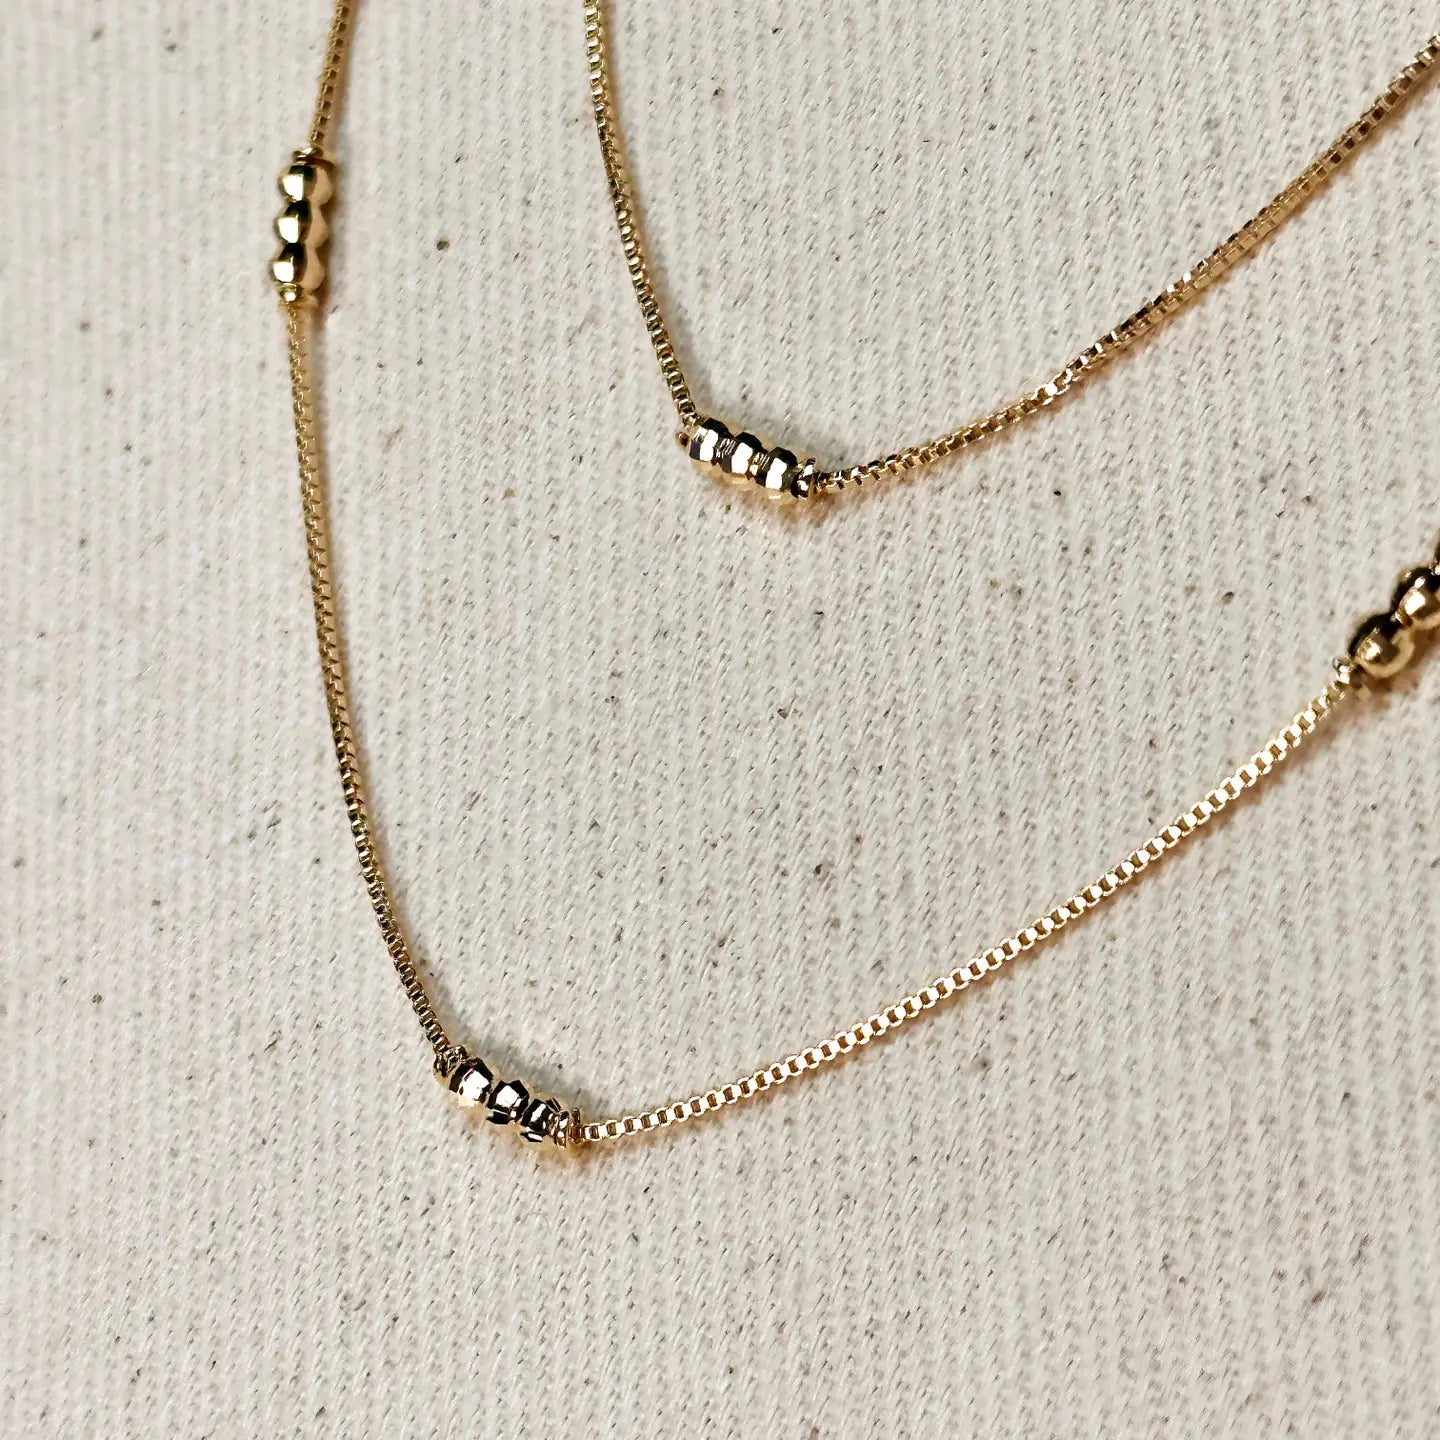 18k Gold Filled Bead Detailed Box Chain - 16 INCHES